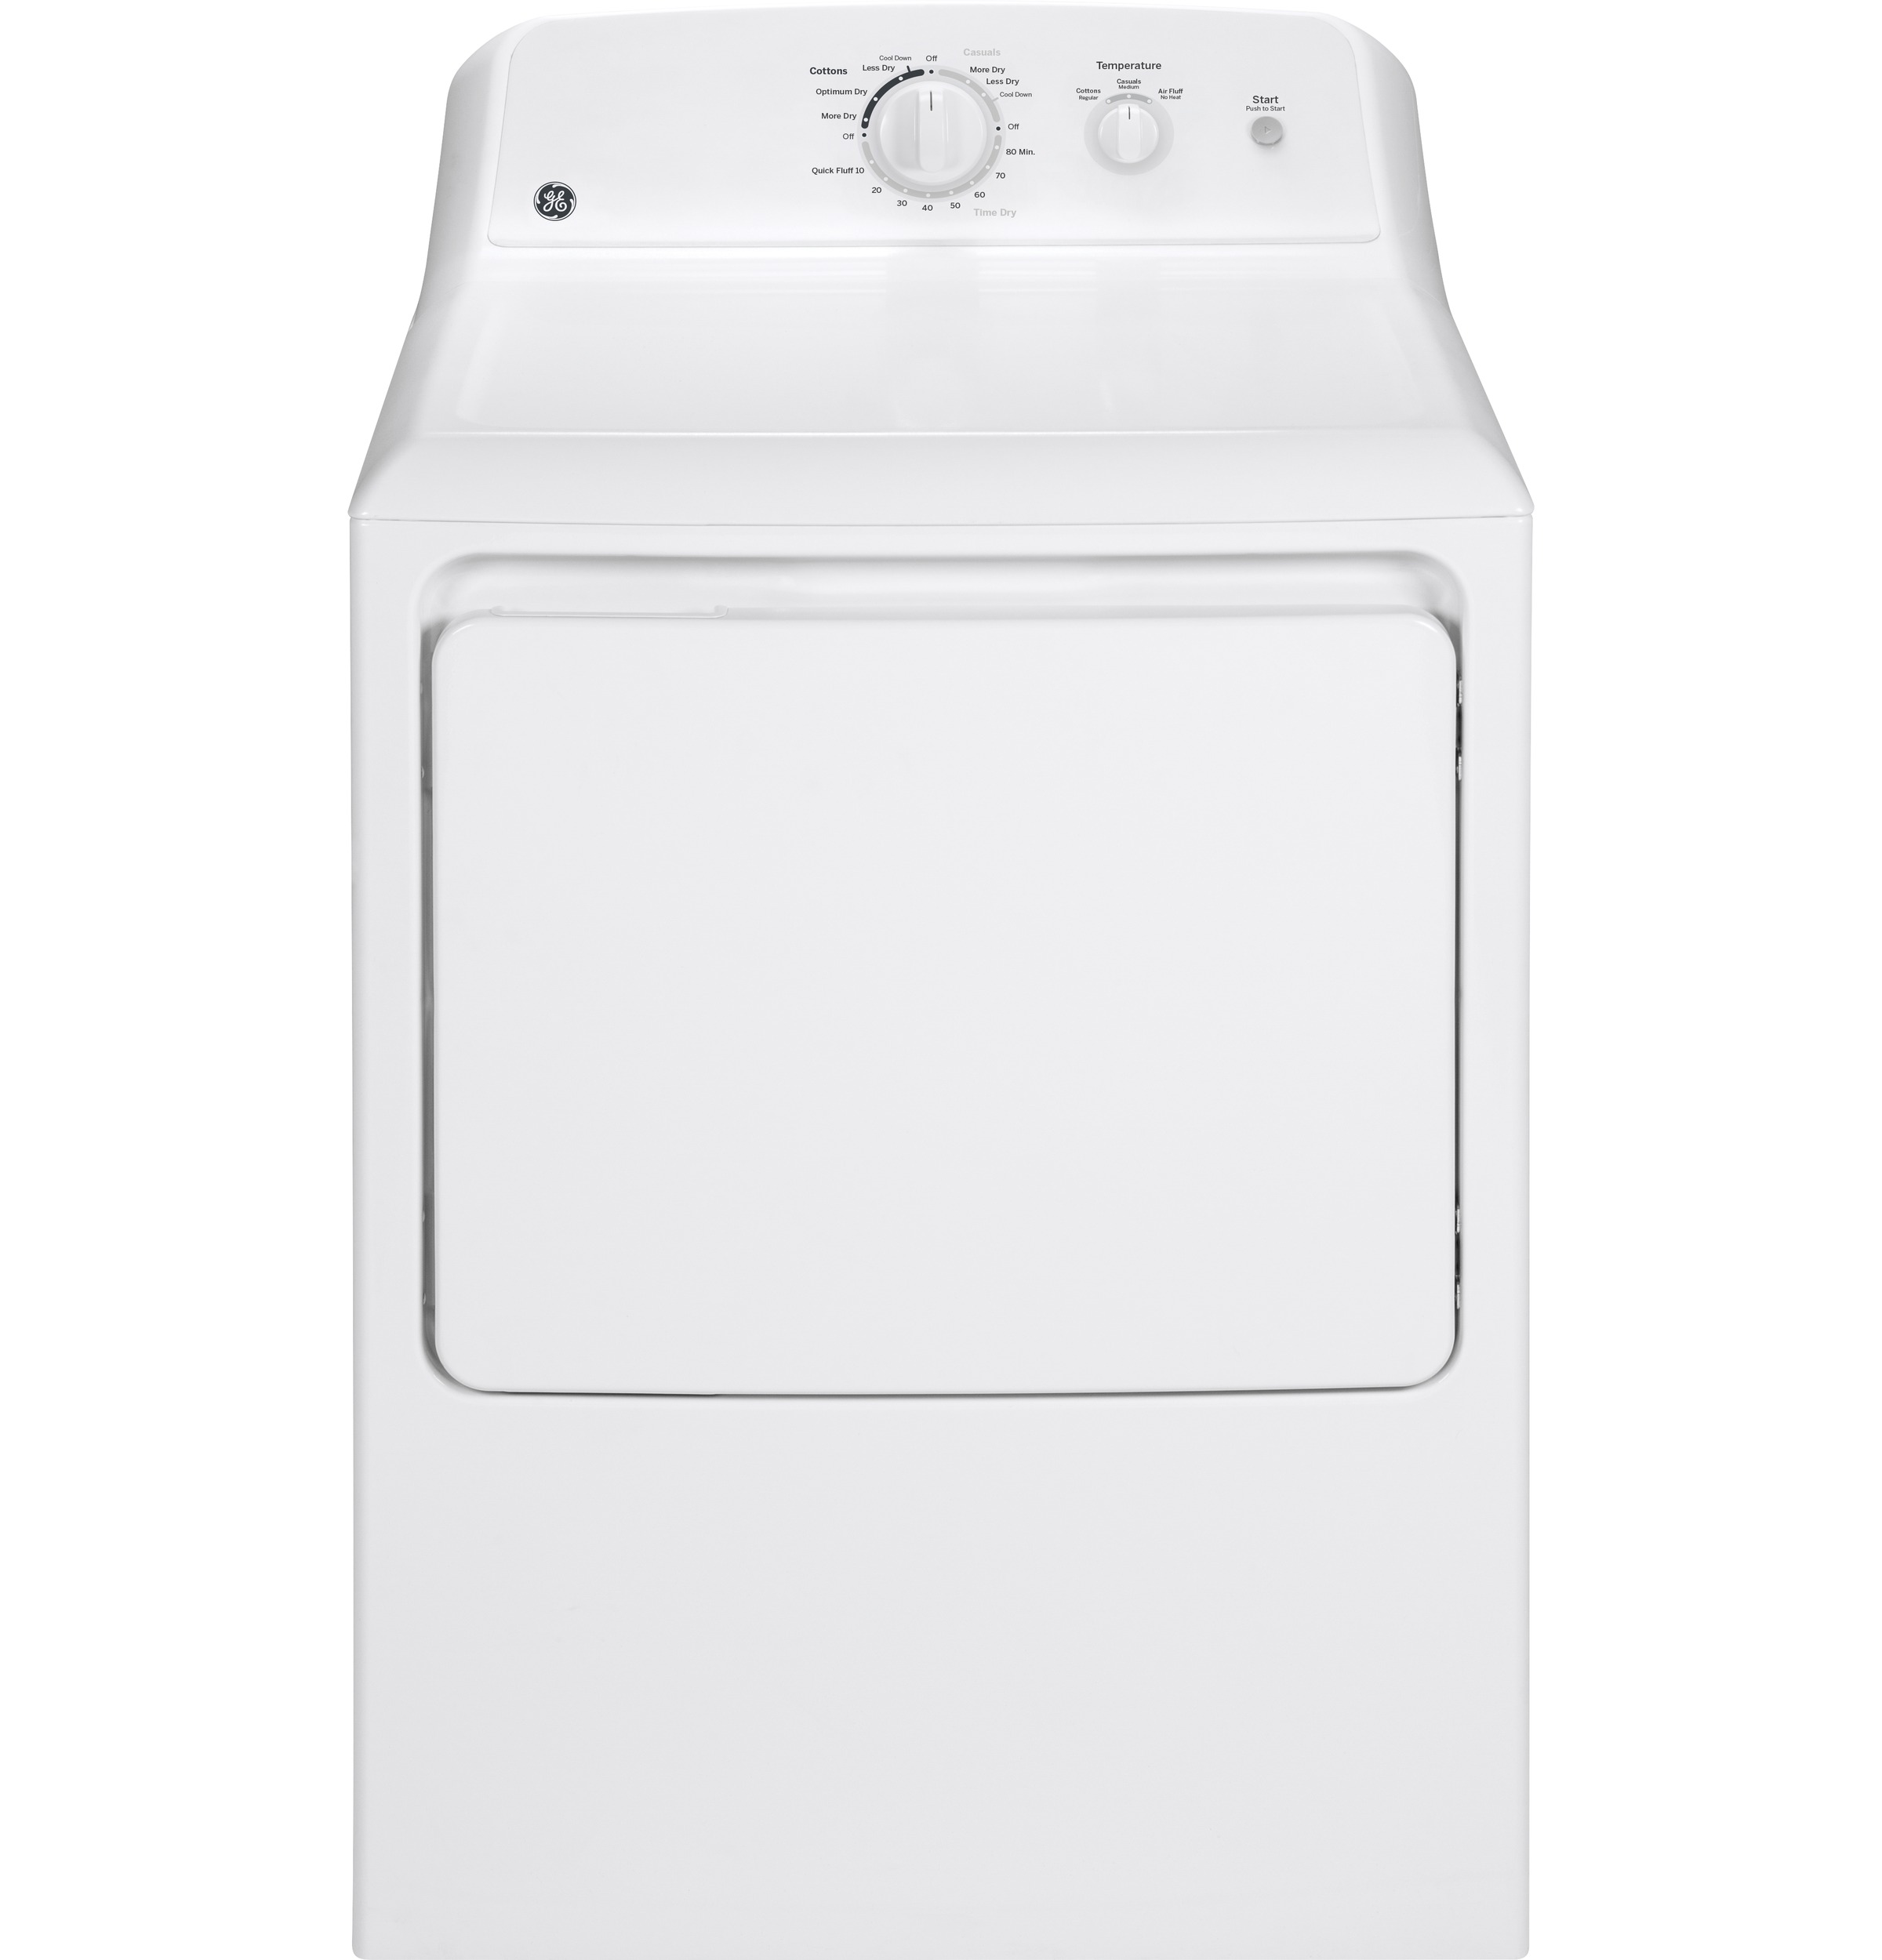 GE 6.2 cu. ft. Capacity Electric Dryer with Up To 120 ft. Venting and Shallow Depth​